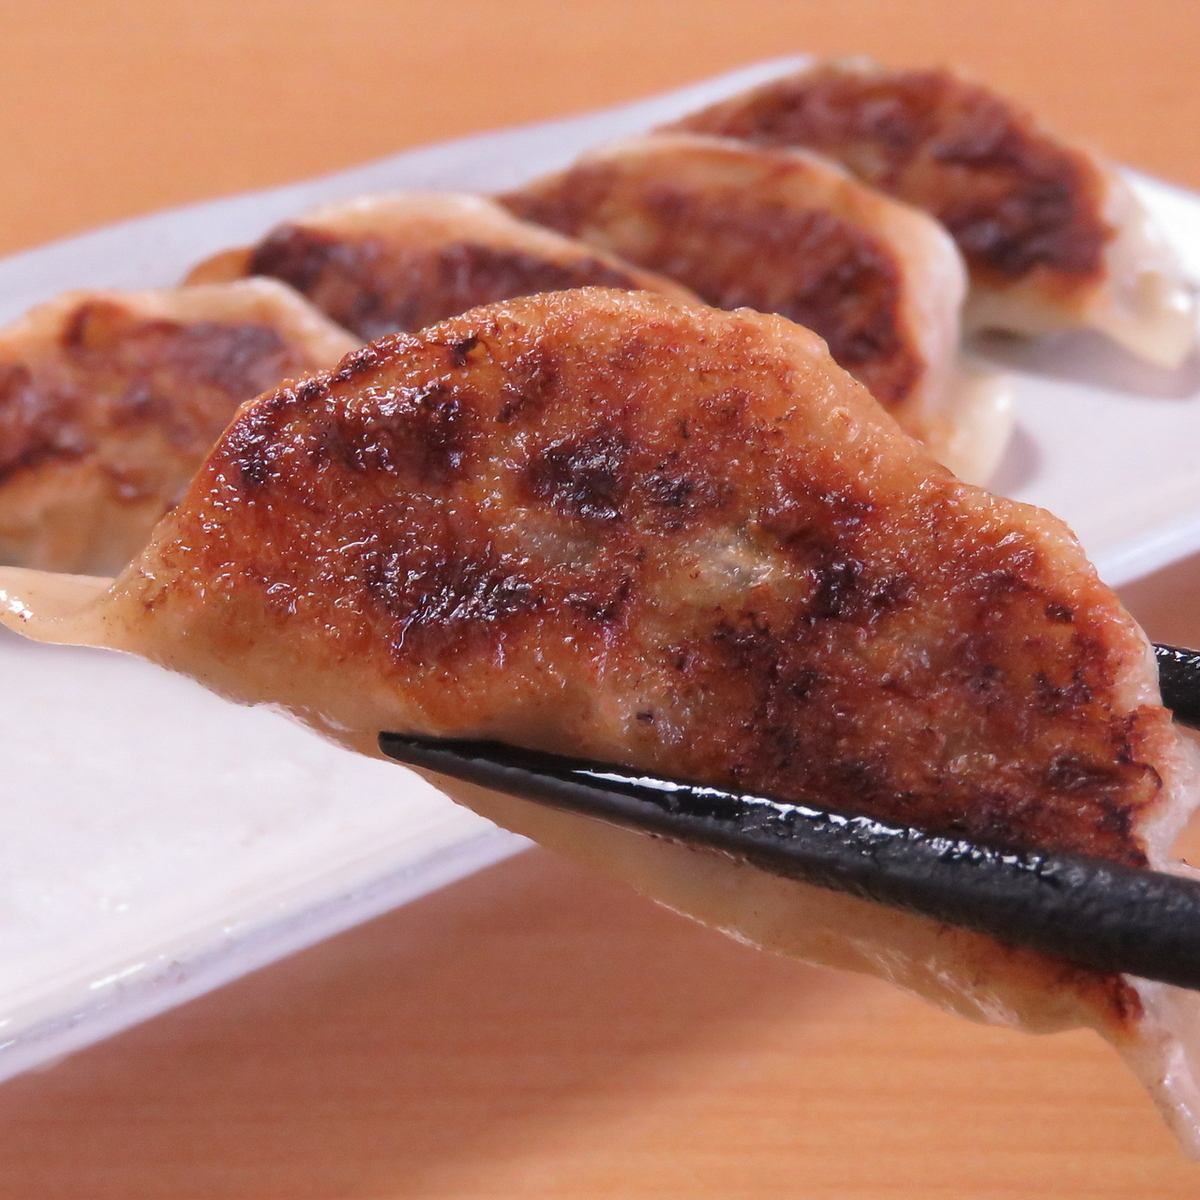 You can enjoy special dumplings and delicious sake ♪ Takeout is also very popular !!